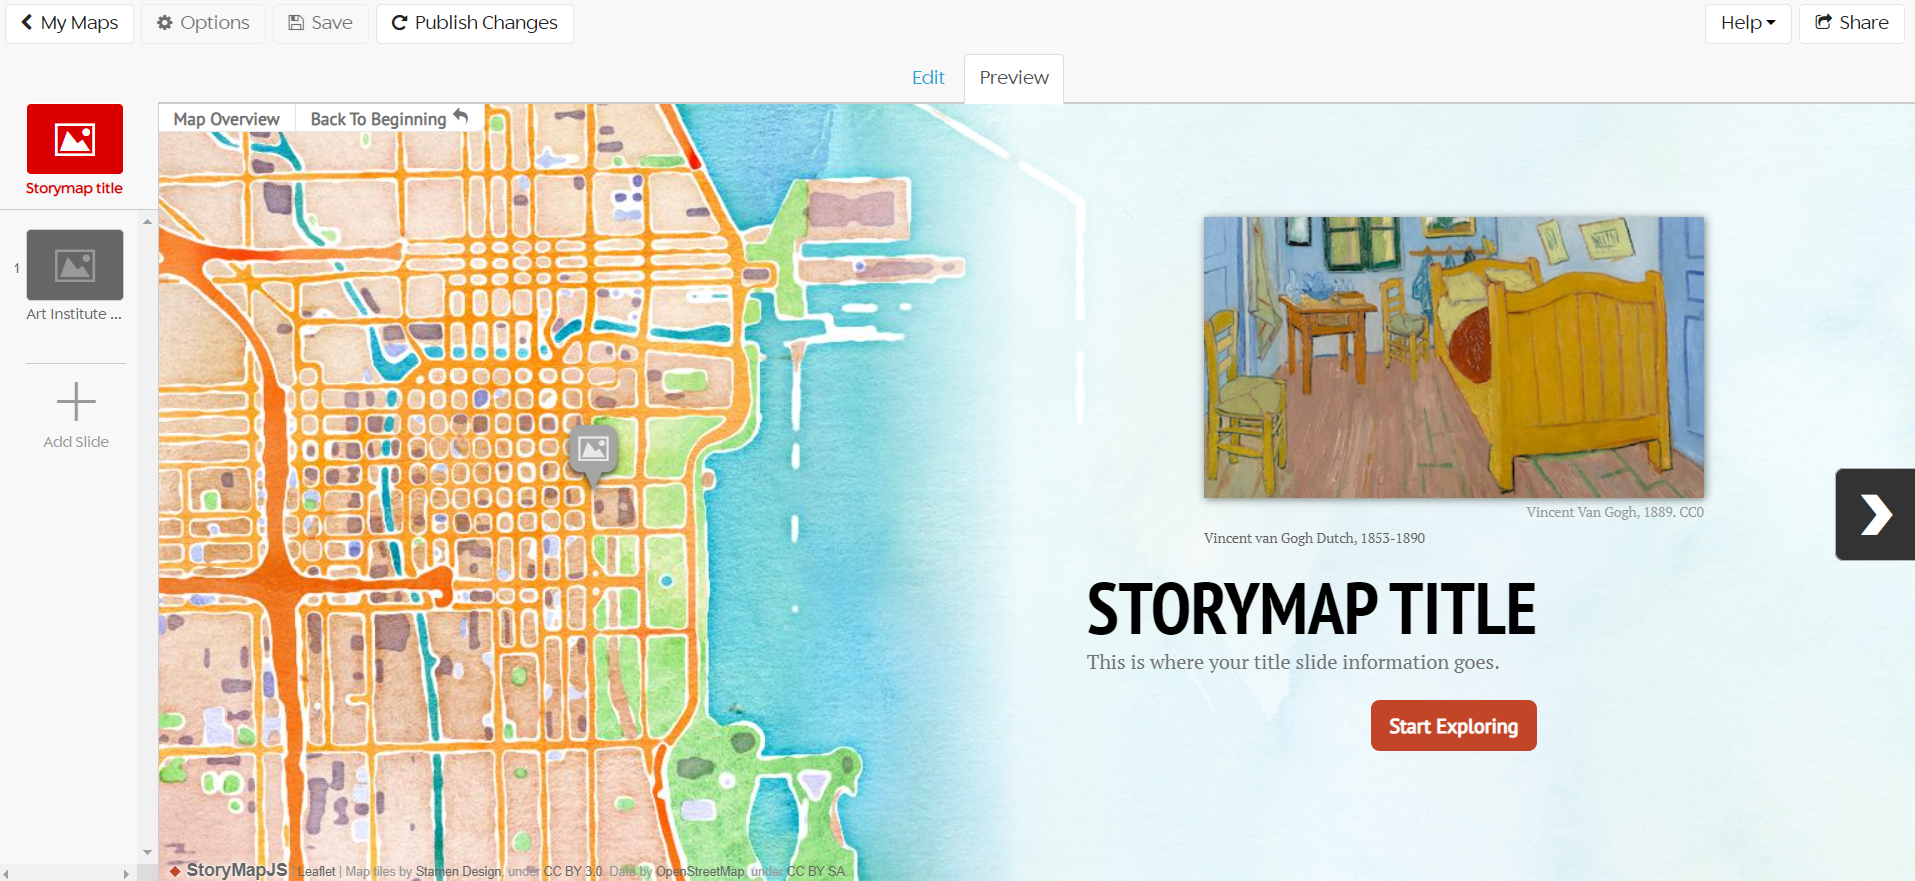 StoryMap title slide preview screen